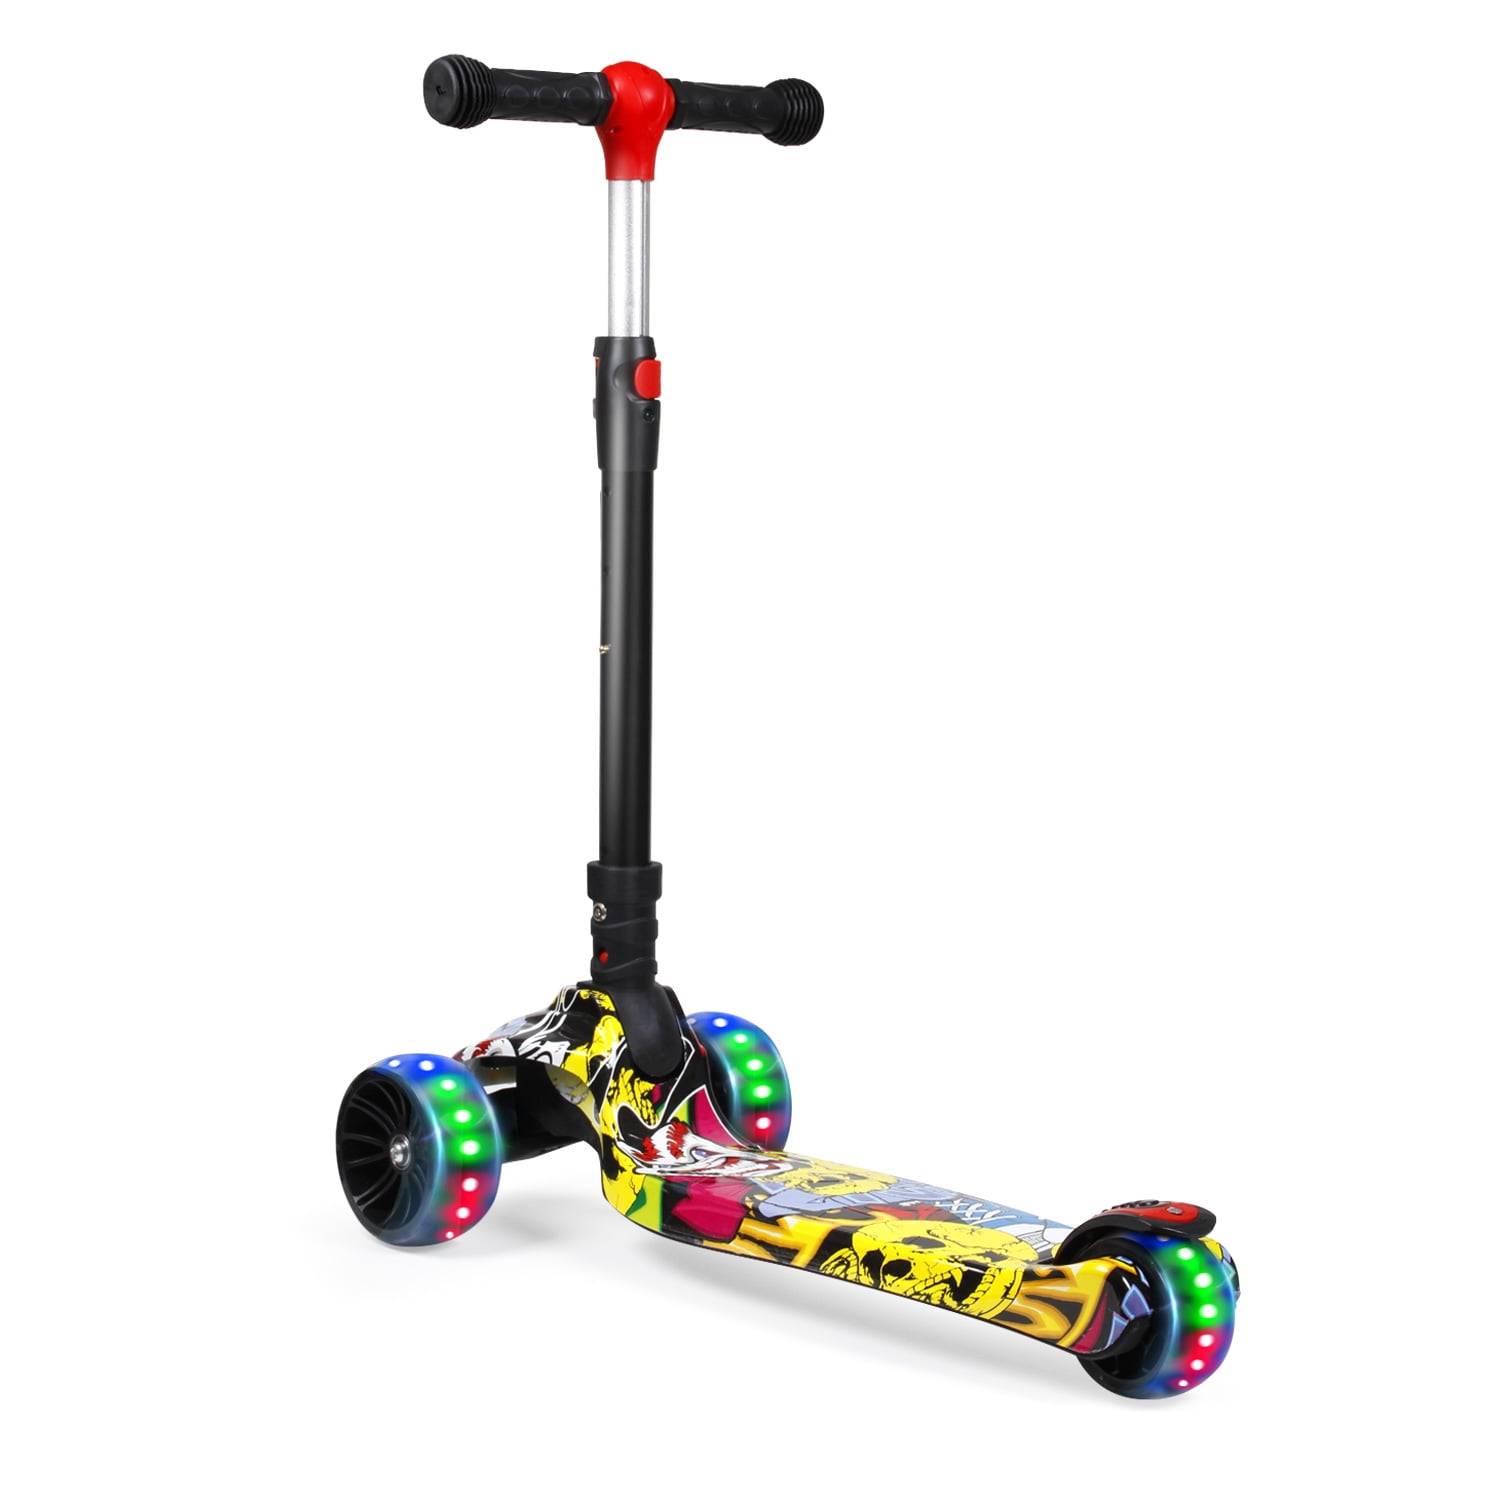 LED Scooter for Kids Deluxe 3 Wheel Glider with Kick n Go Lean 2 Turn Graffiti~ 